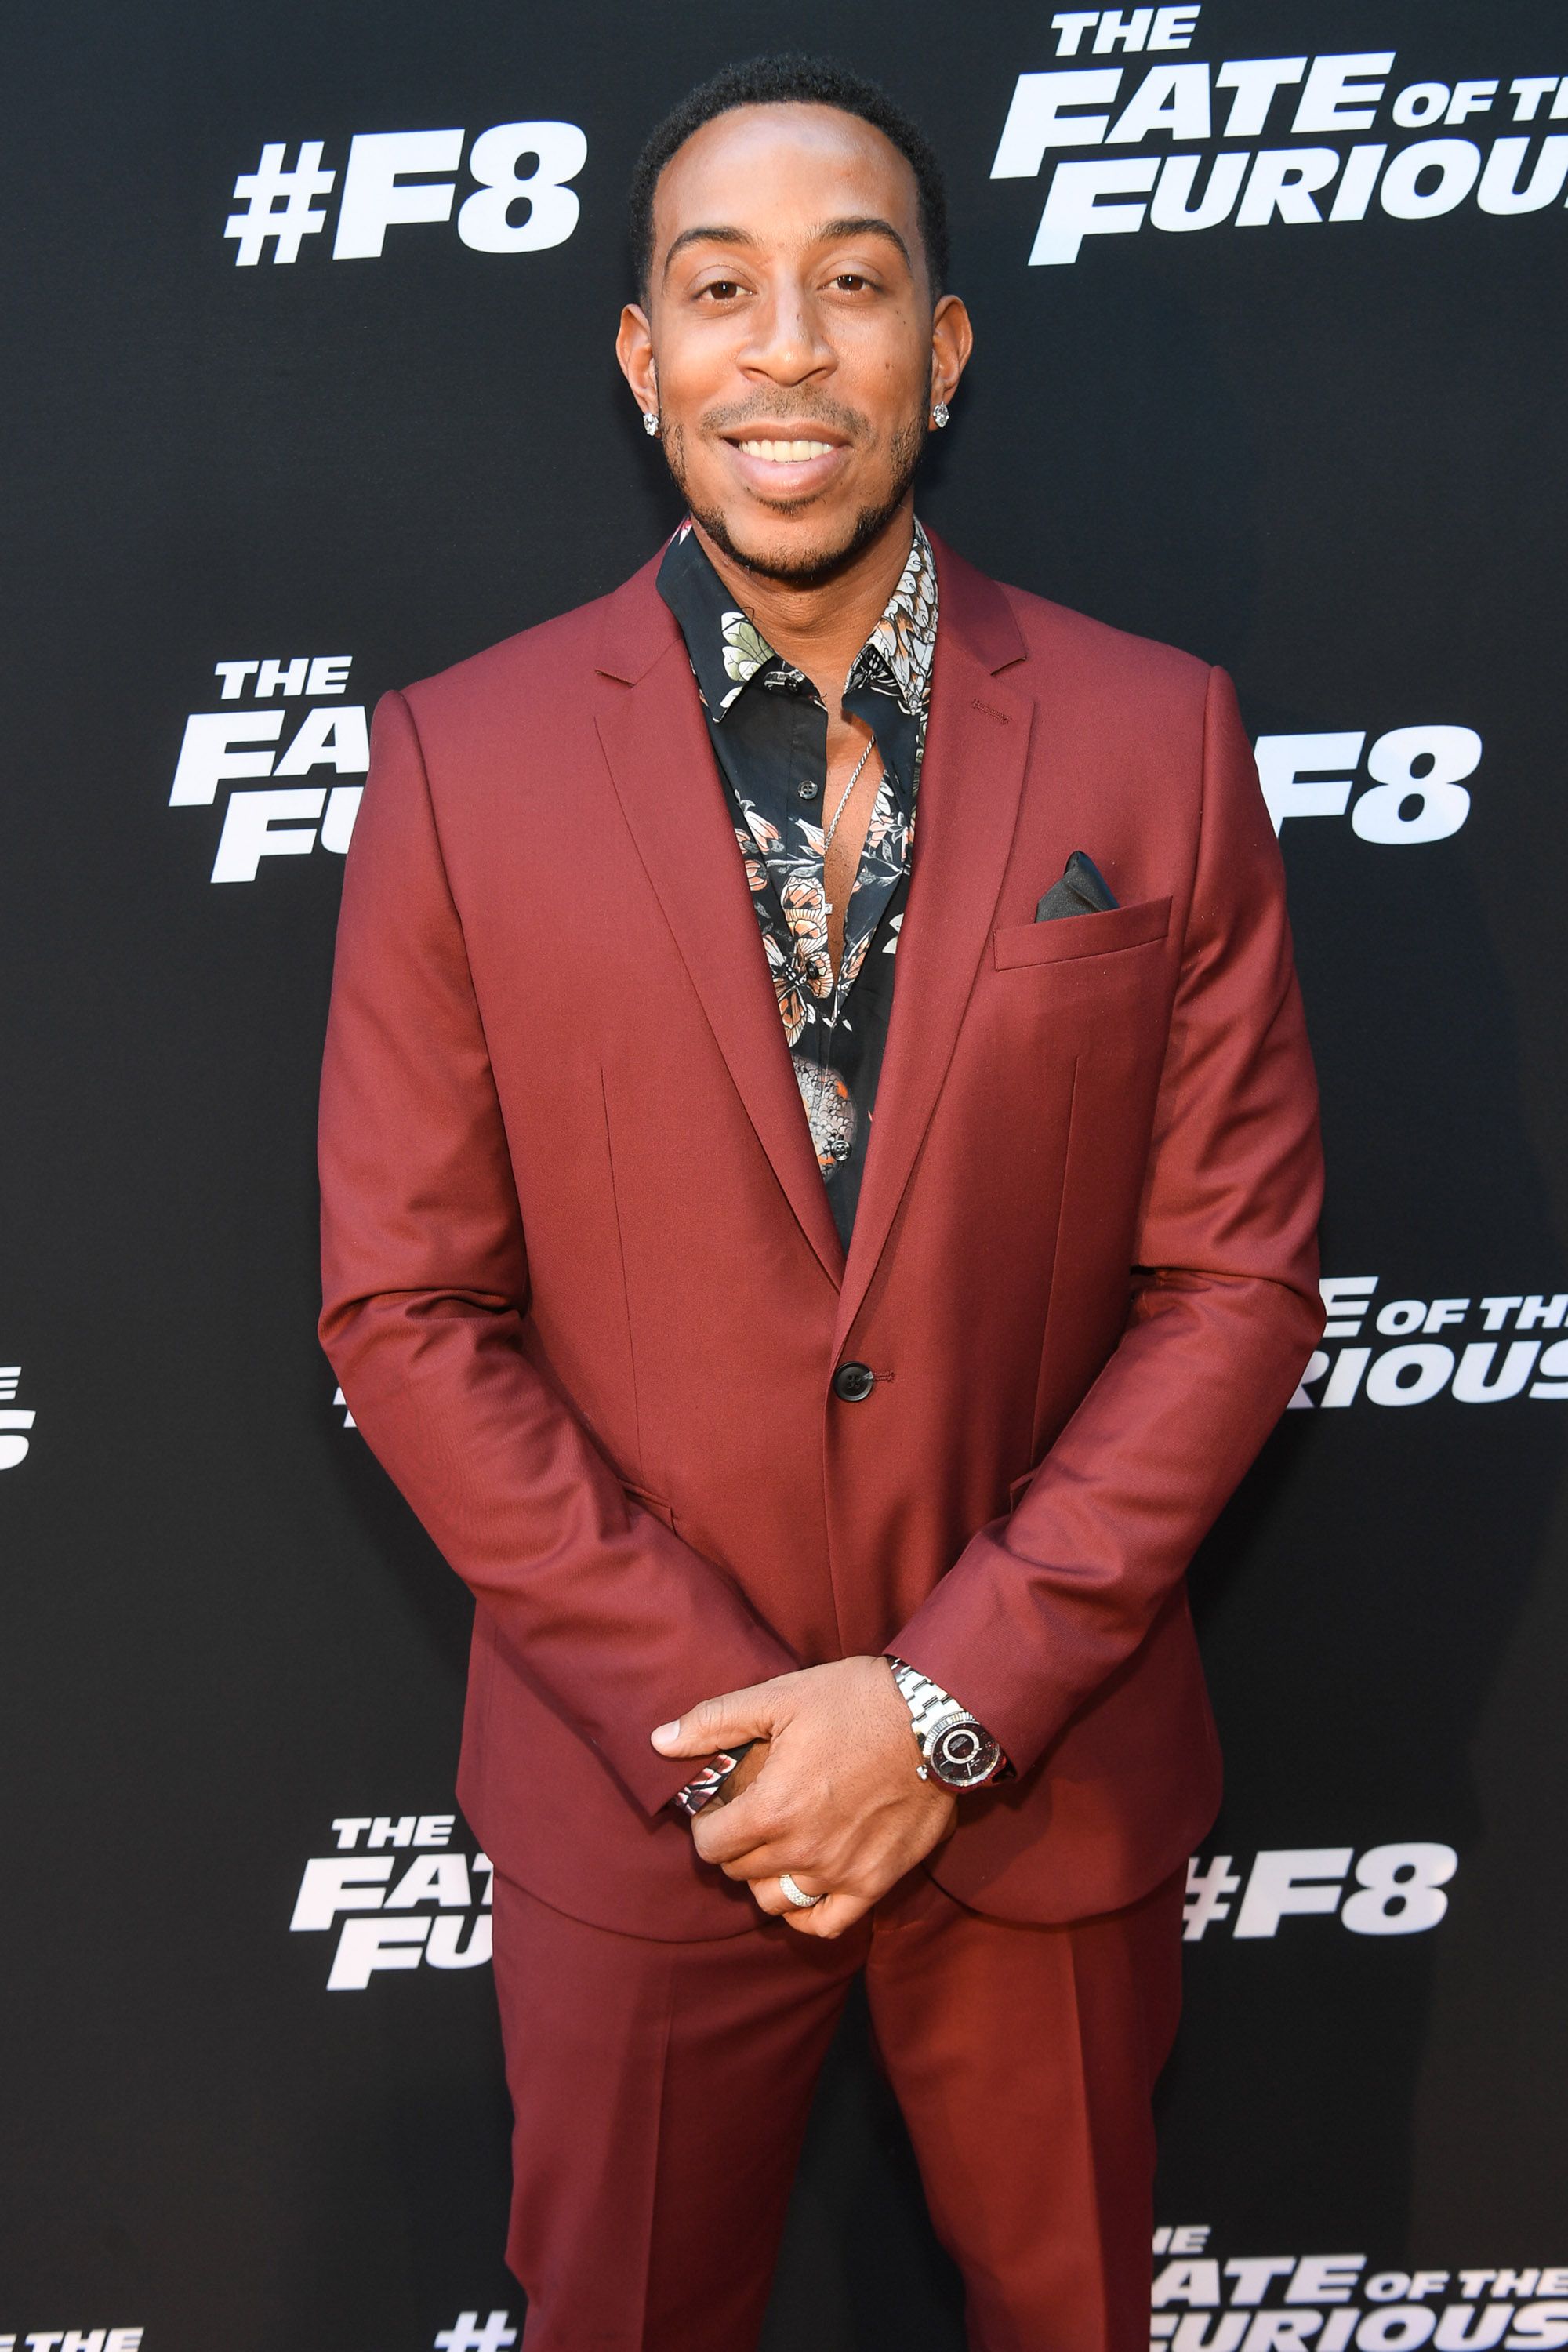  Ludacris attends "The Fate Of The Furious" Atlanta red carpet screening at SCADshow on April 4, 2017 in Atlanta, Georgia. | Source: Getty Images